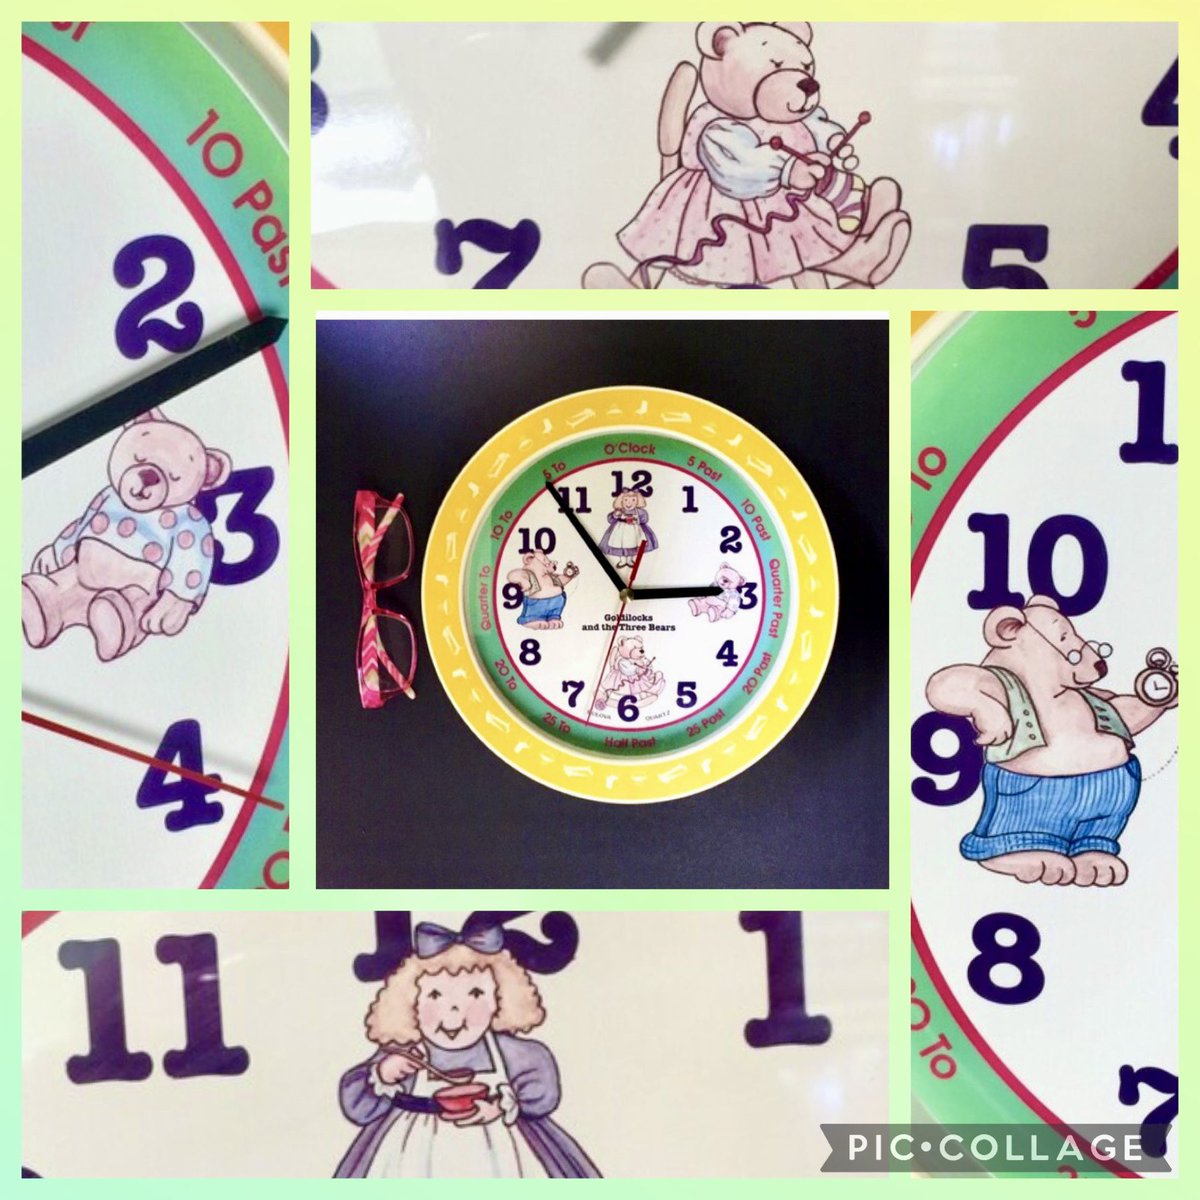 Early learning clock on #Etsy🌷 etsy.com/shop/TheEterna… 🌷 #WelcomeSpring #SpringSale #EarlyLearning #TeachingClock #ChildrensClock #ChildrensDecor #HomeSchooling #HomeDecor #VintageHome #VintageShopping